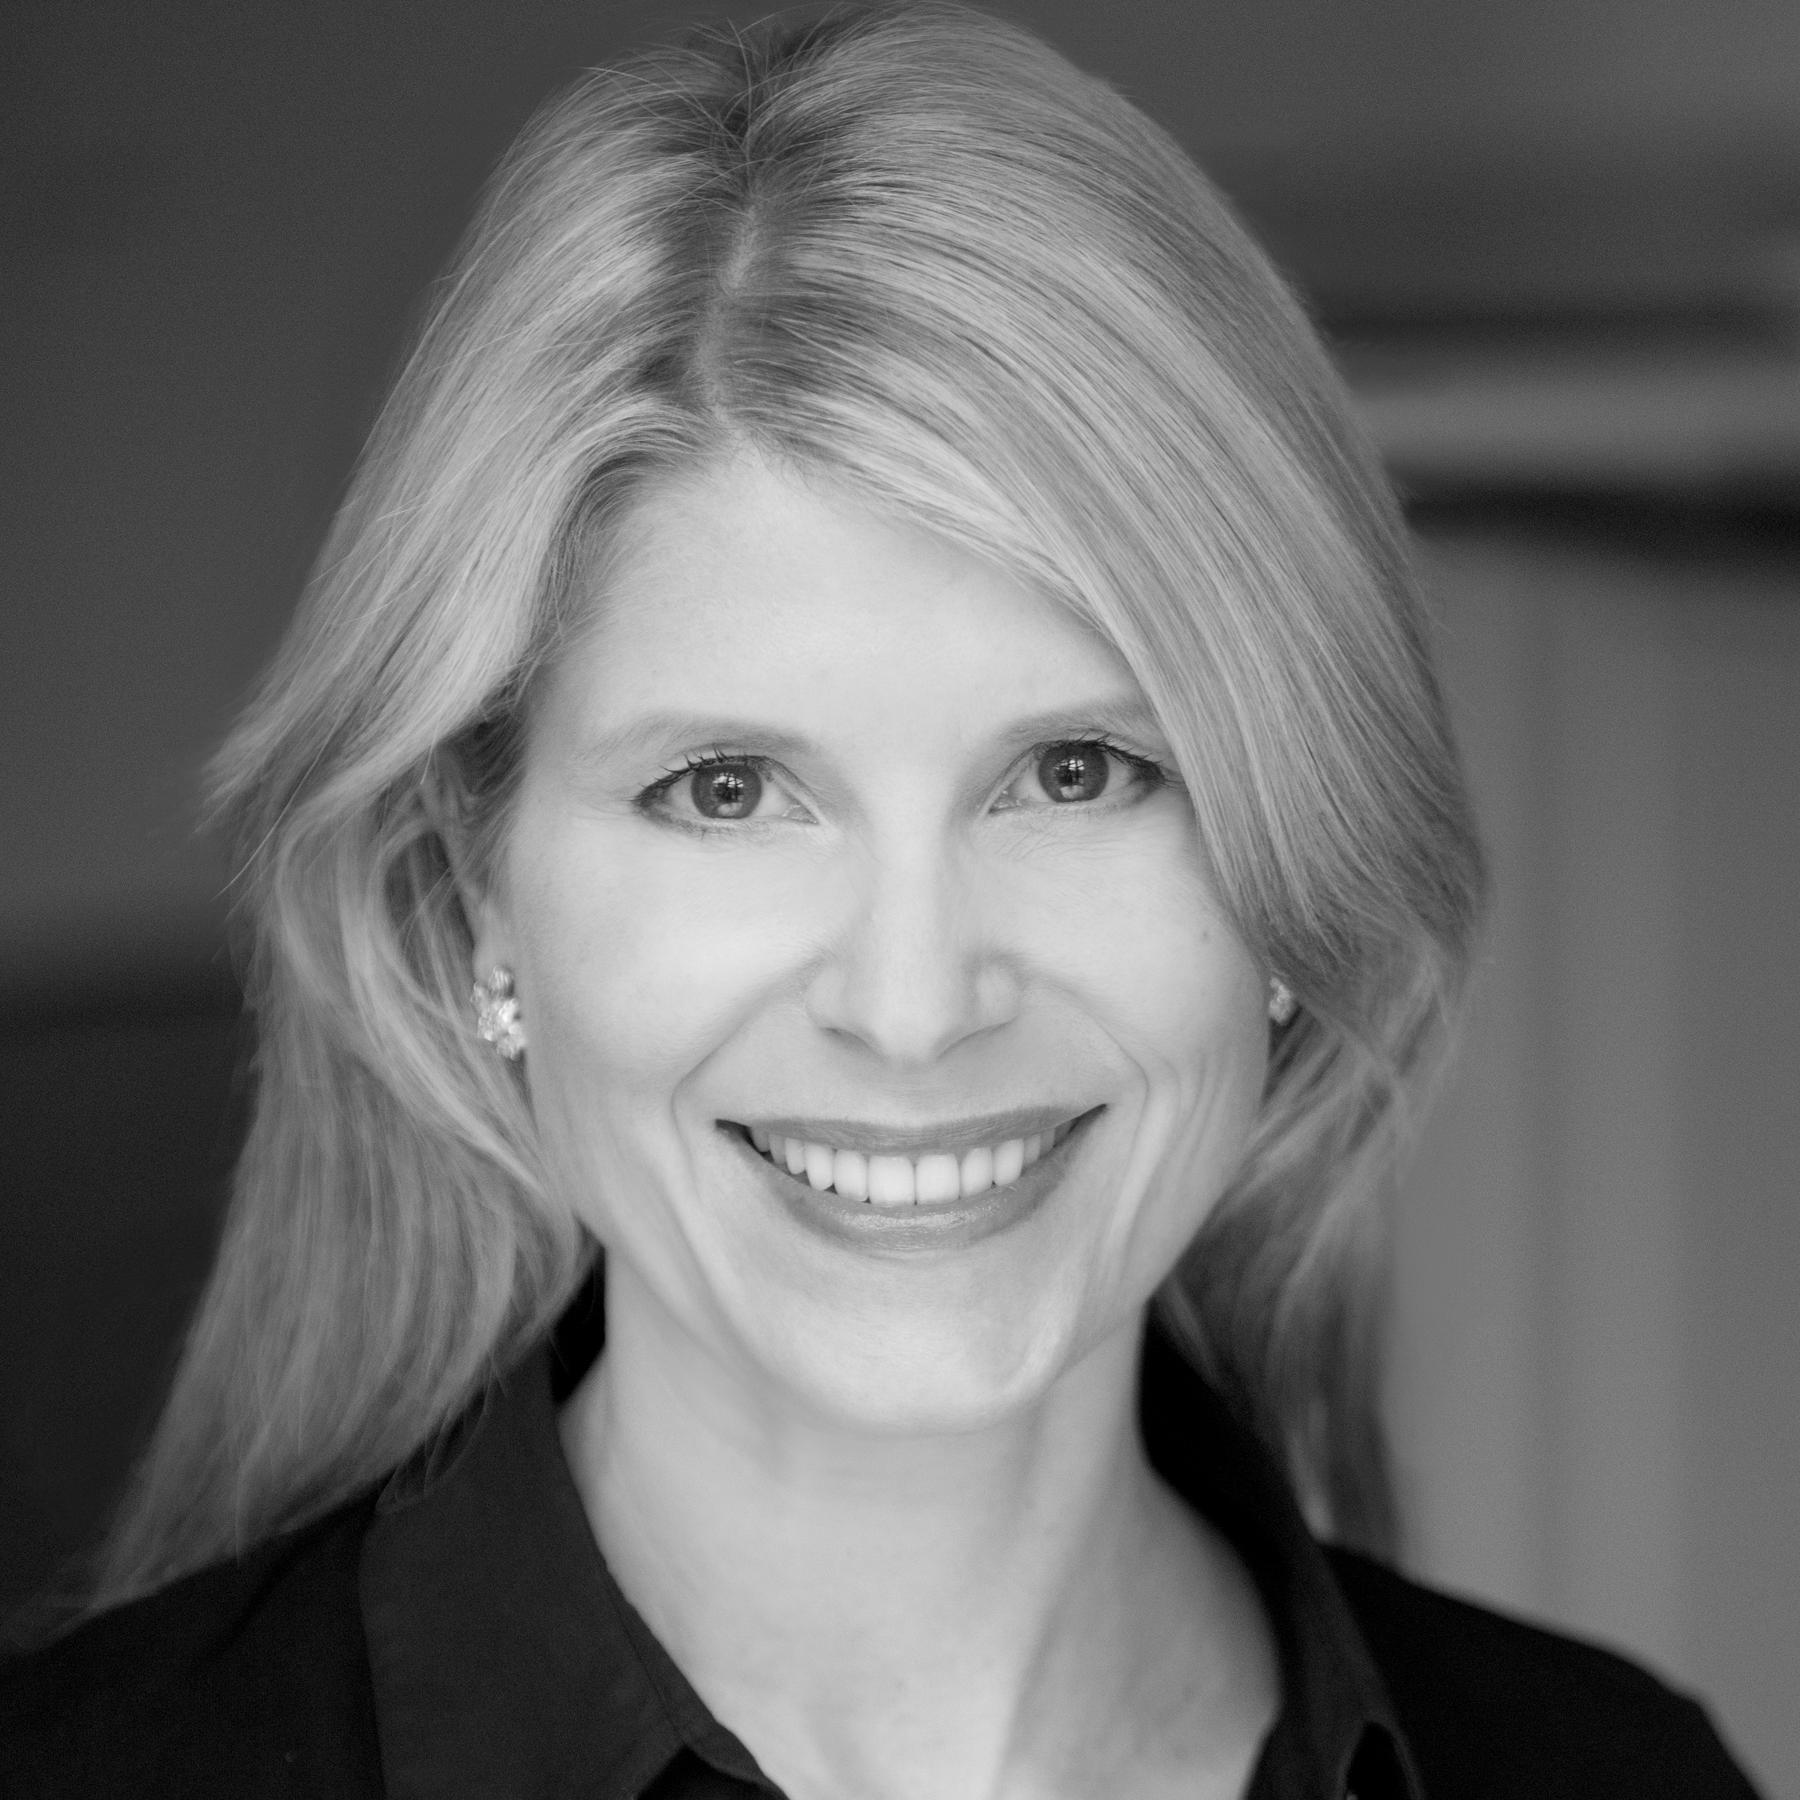 &lt;h3&gt;Shannon Schuyler&lt;/h3&gt;&lt;h5&gt;Principal, Chief Purpose Officer and Corporate Responsibility Leader, PwC, and President&lt;/h5&gt;&lt;i&gt;PwC Charitable Foundation&lt;/i&gt;